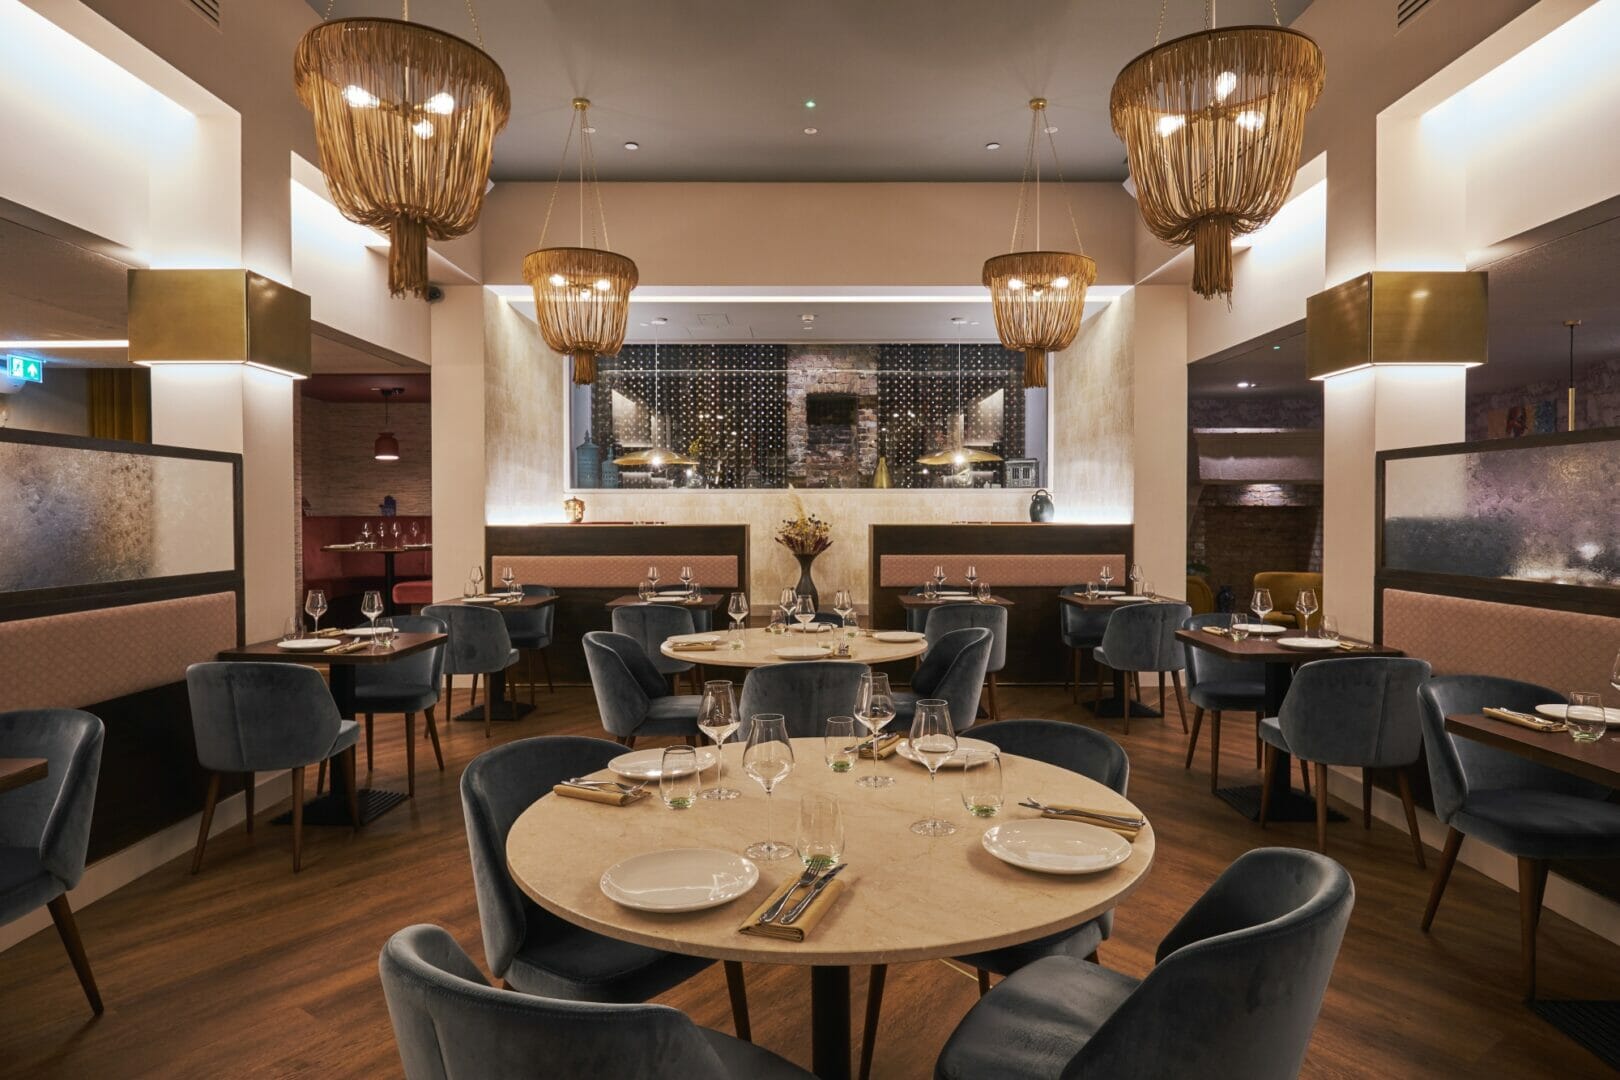 Michelin Star Chef Peter Joseph opens first restaurant with KAI Interiors